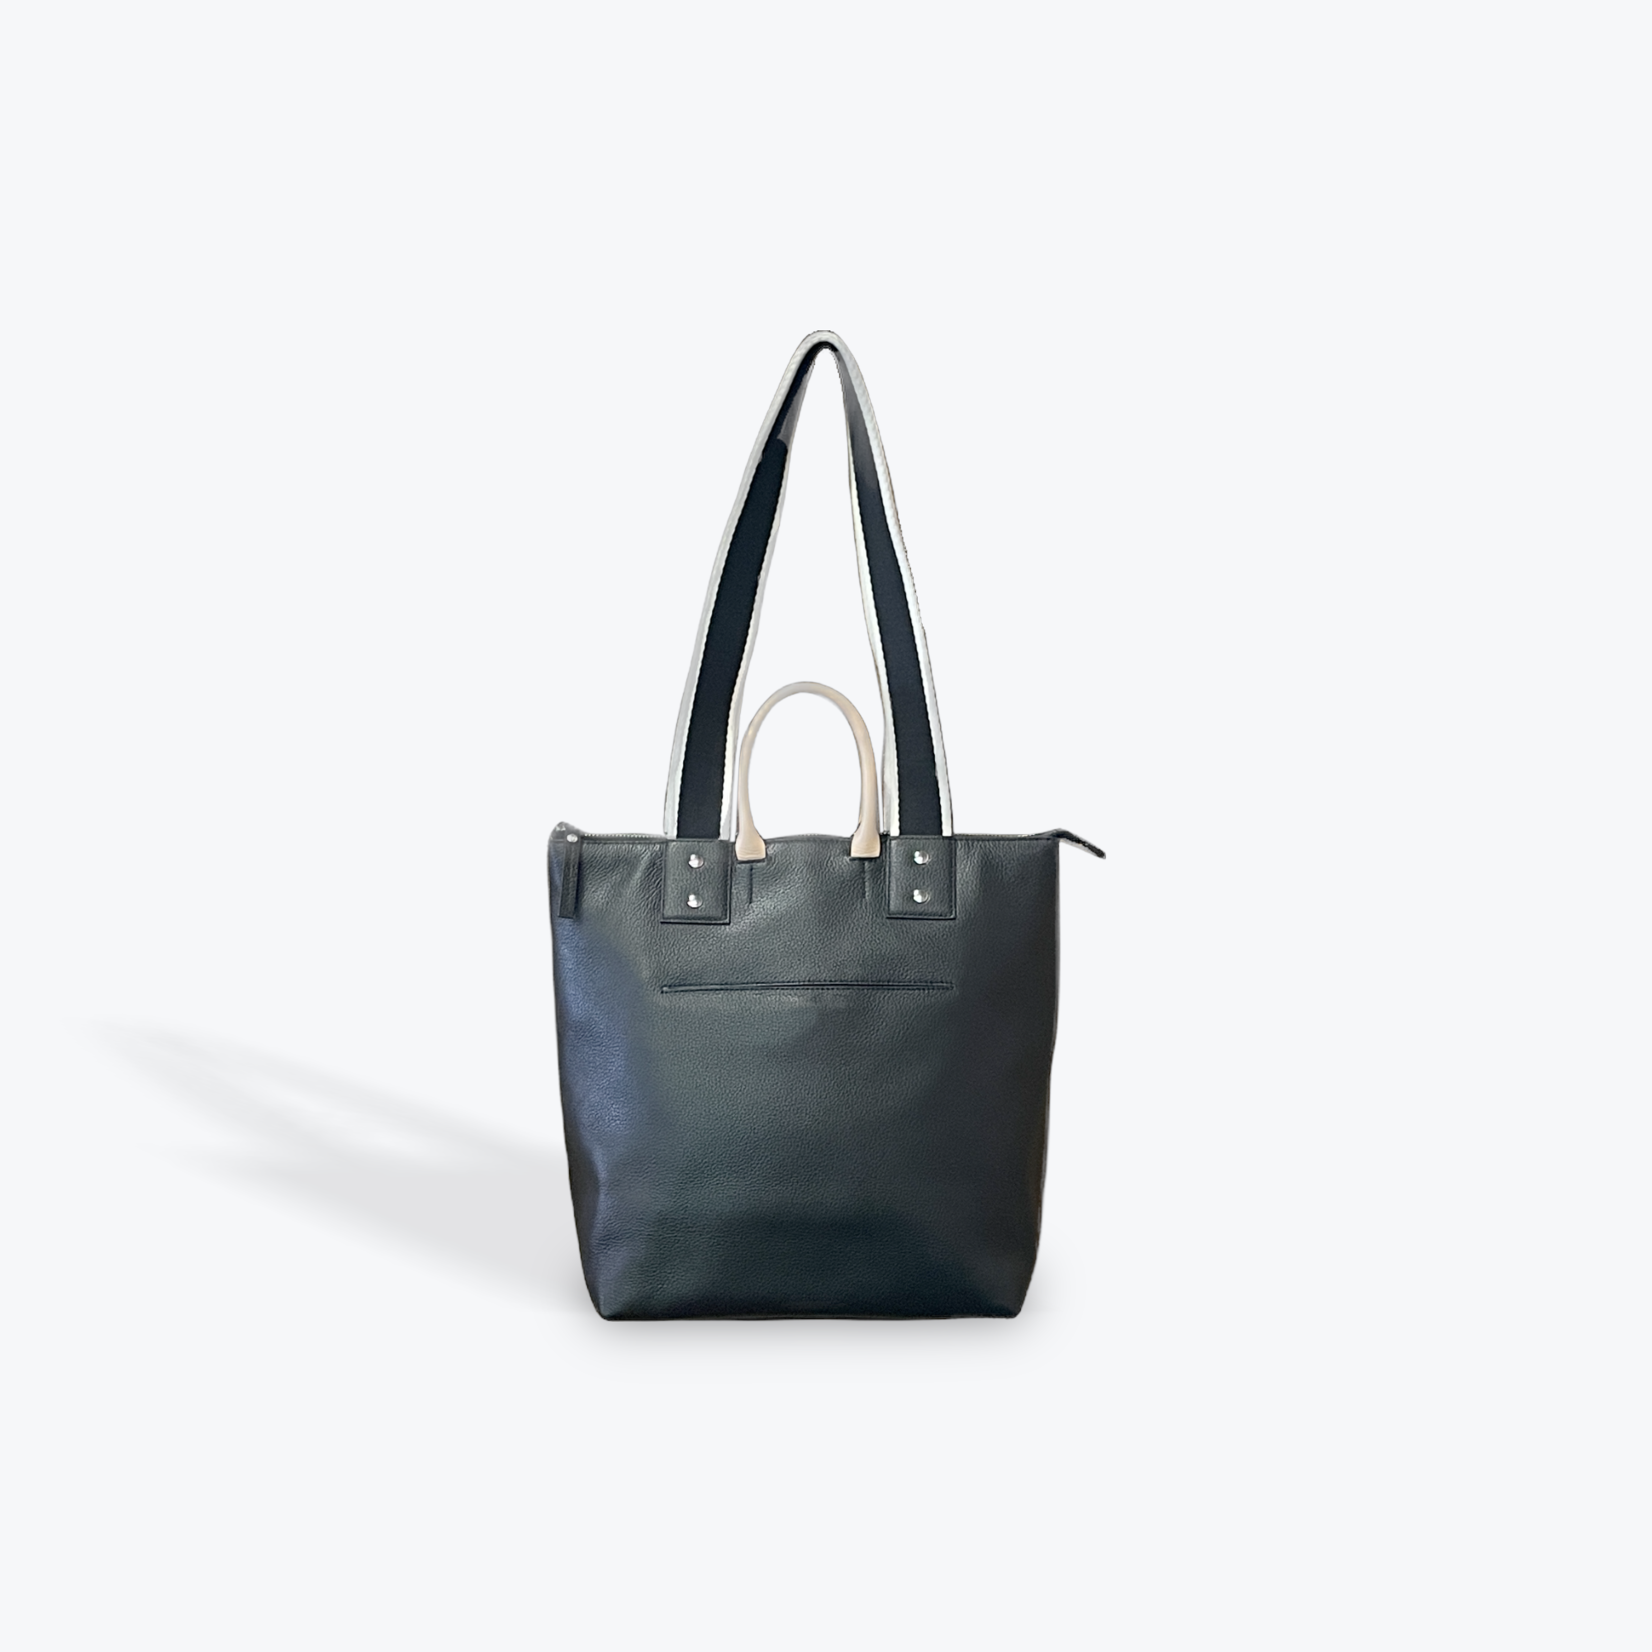 Willow ADG Ashley Carryall Tote